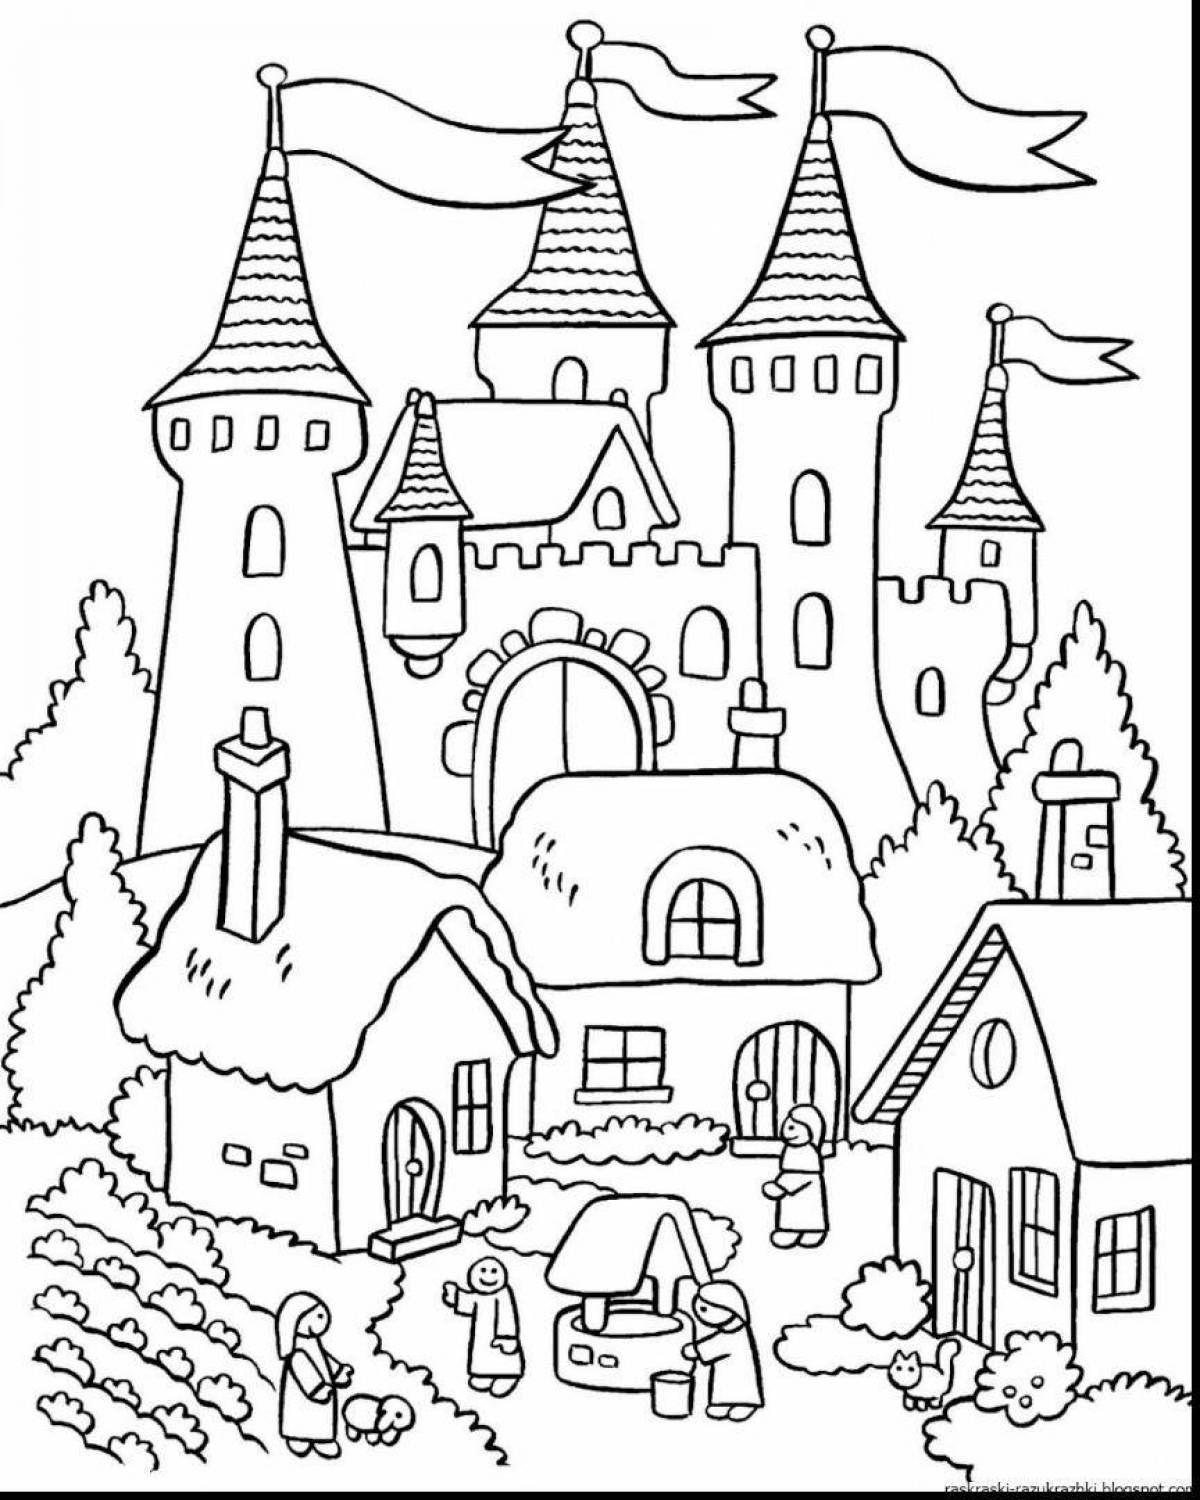 Great castle coloring book for 4-5 year olds